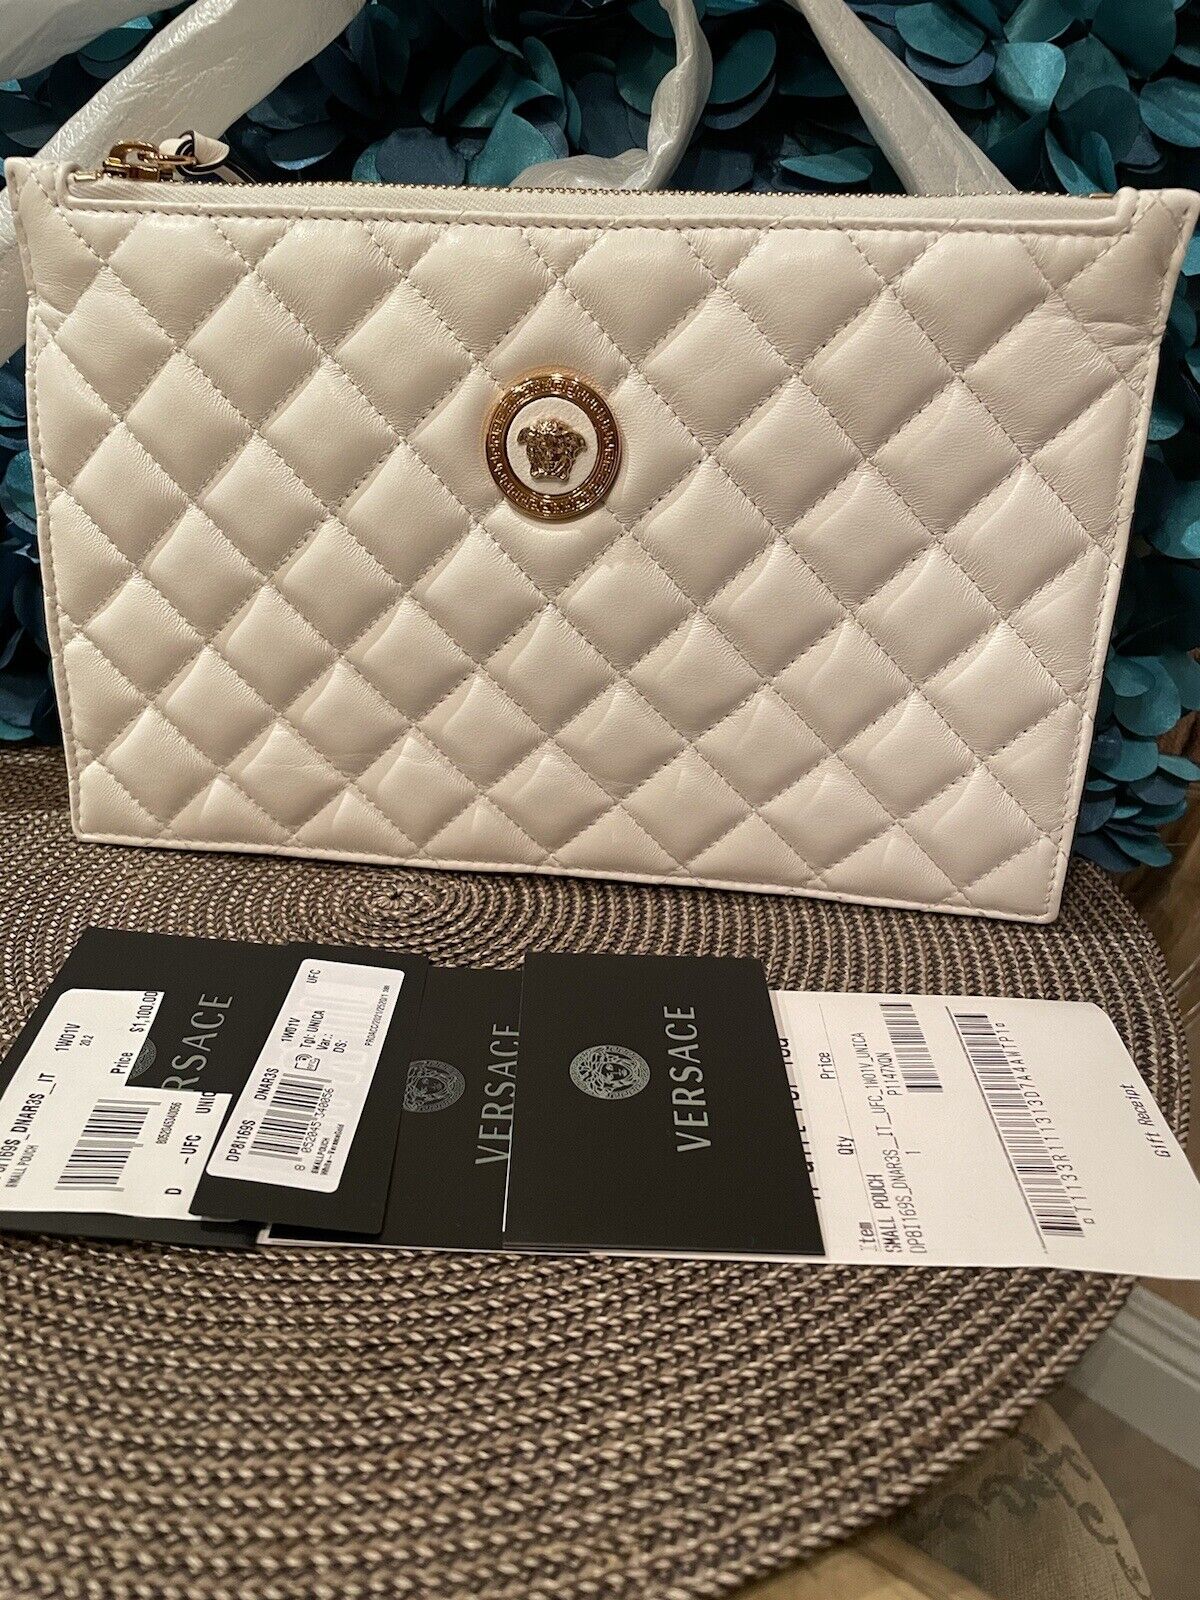 BNWT Versace Medusa Tribute Nappa Leather Shoulder Bag Crossbody White Quilted